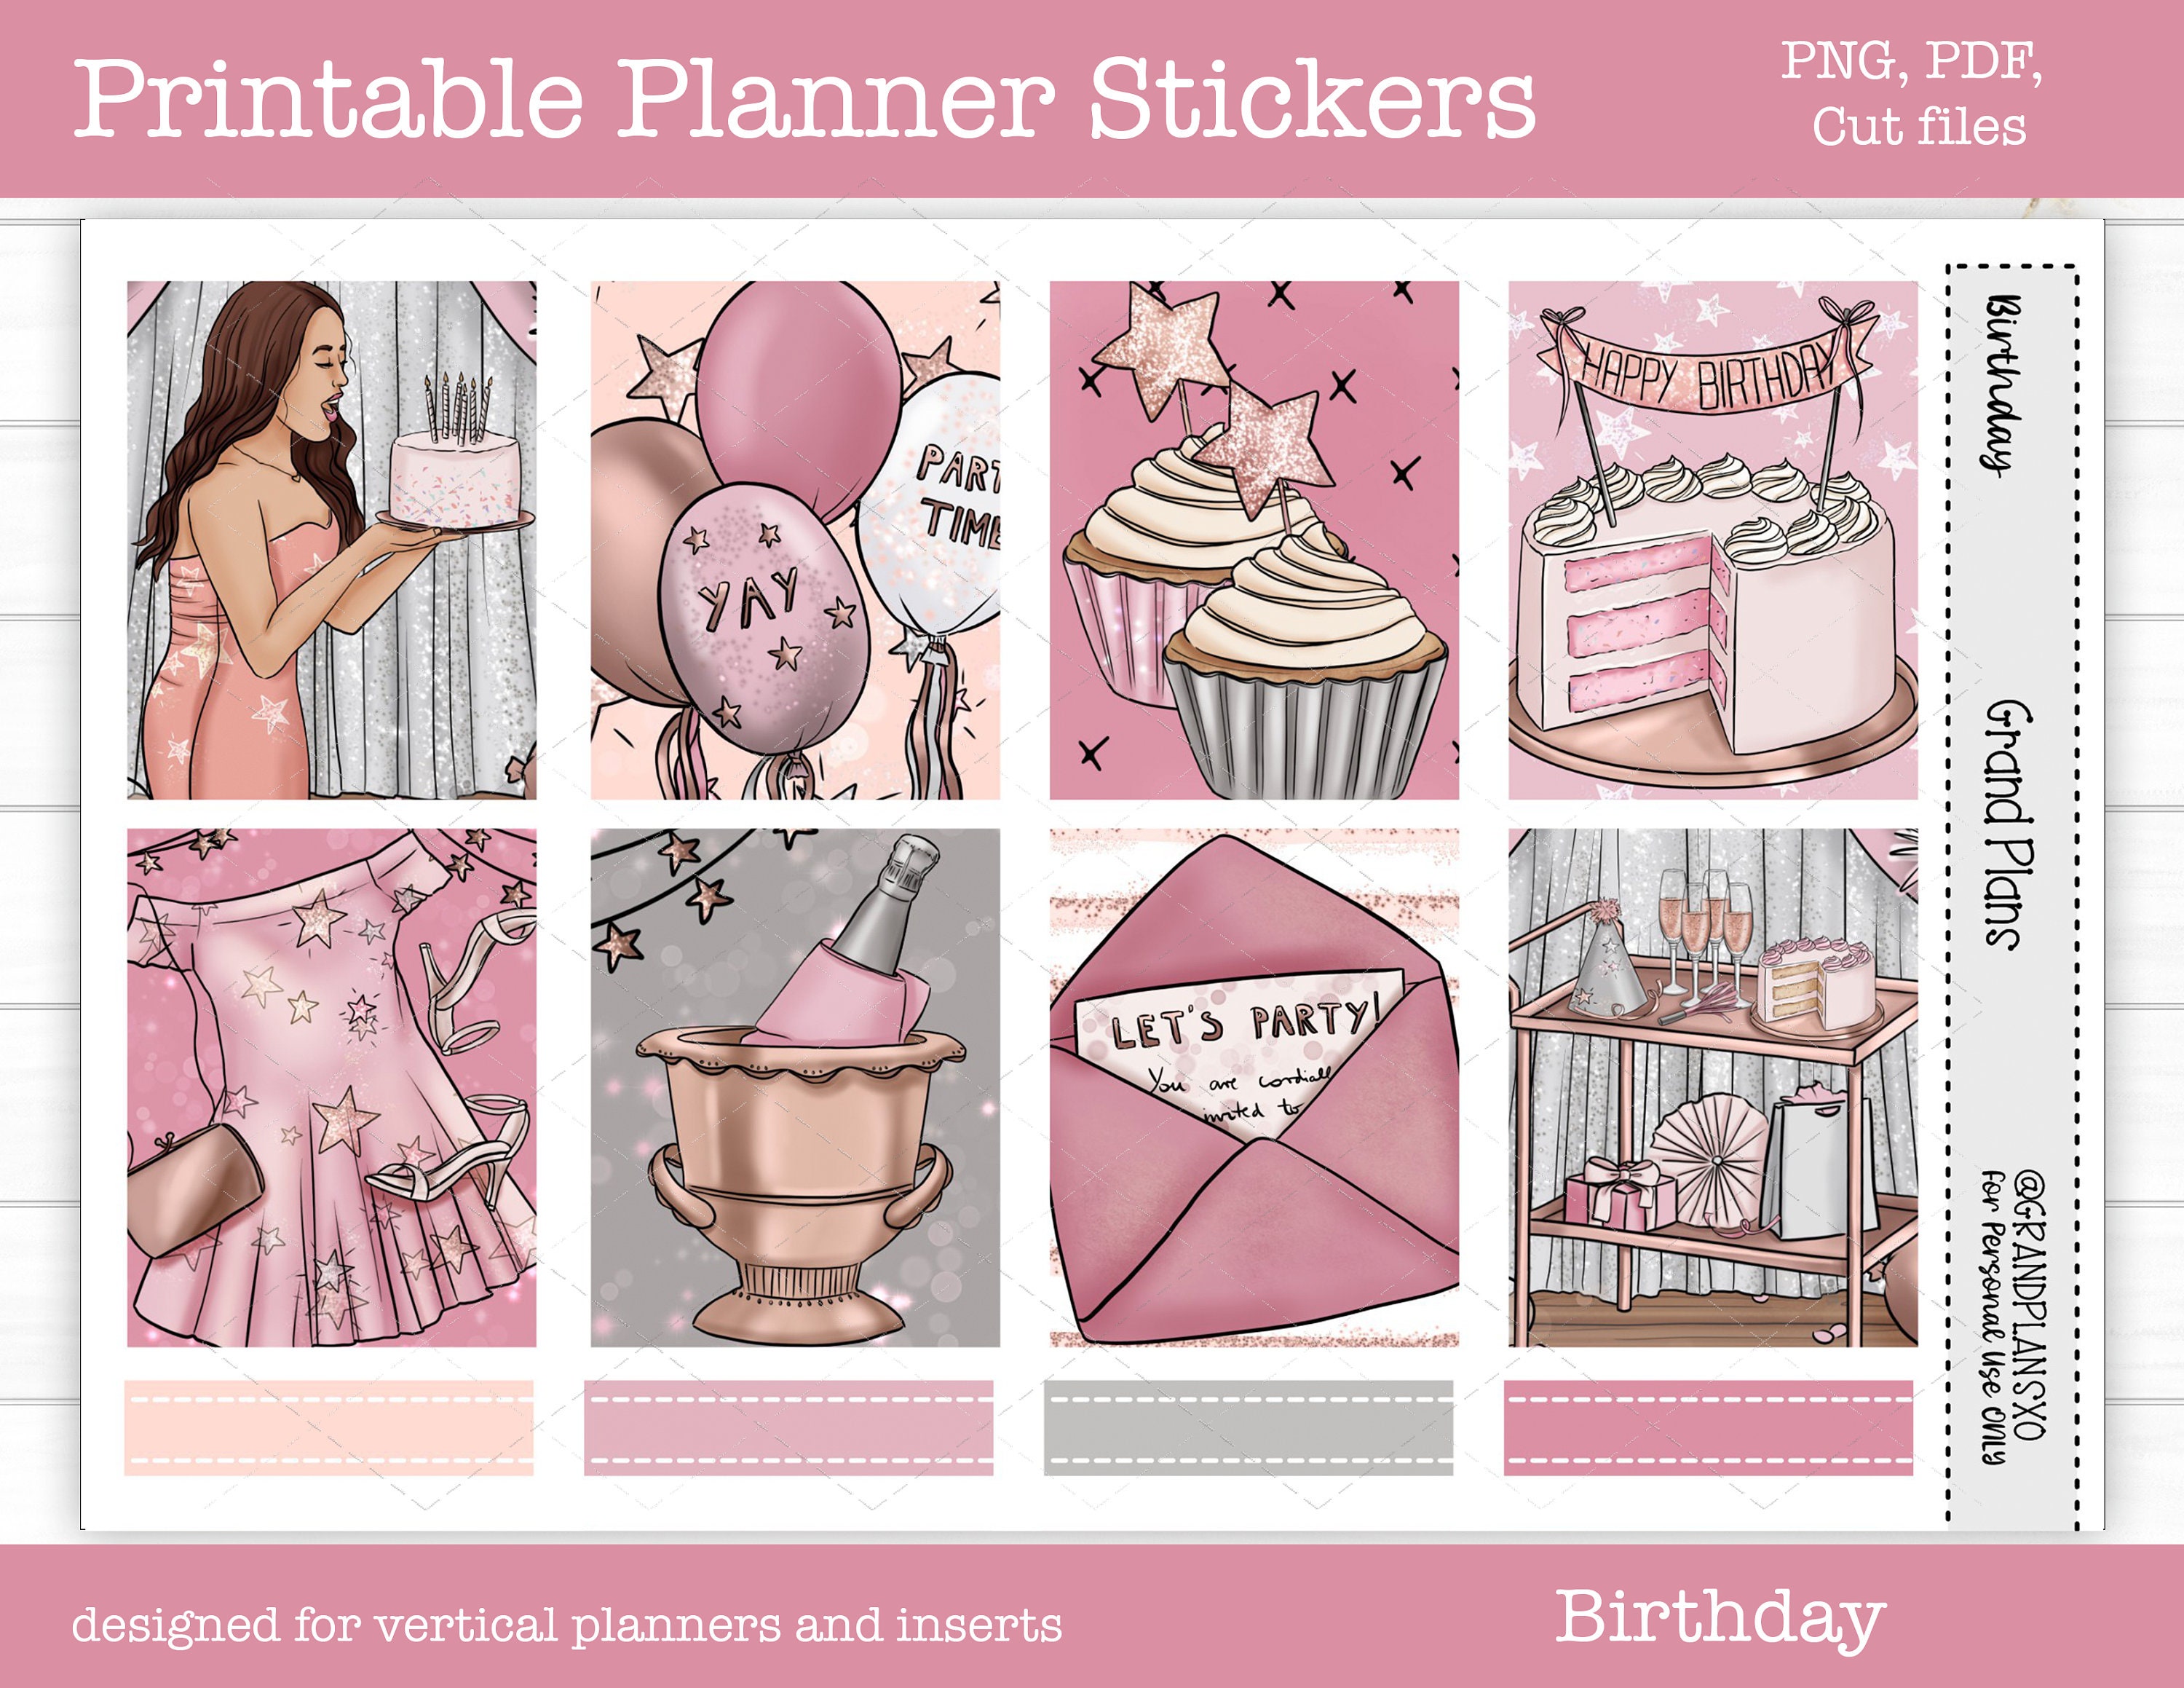 BIRTHDAY Digital Planner Stickers, Goodnotes Stickers, Party Pre